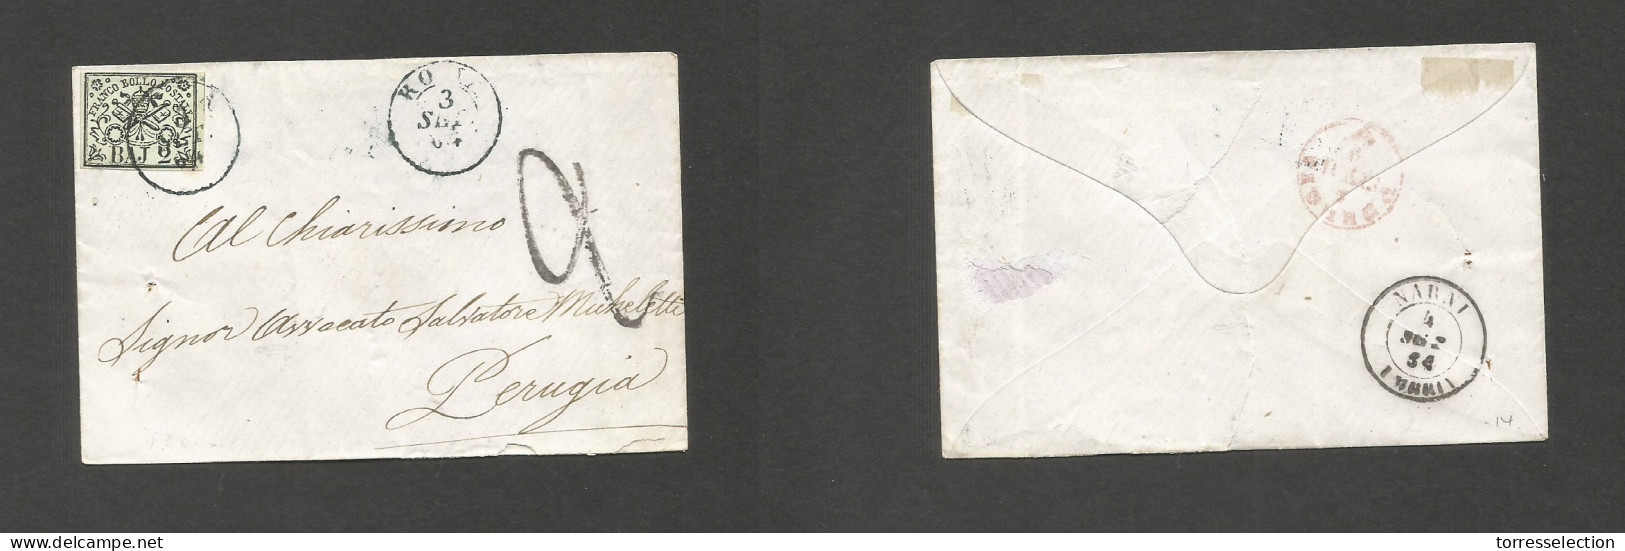 ITALY Papal States. 1864 (3 Sept) Roma - Perugia (4 Sept) Via Narni Envelope Fkd 2 Baj Green Imperf Cds. - Unclassified